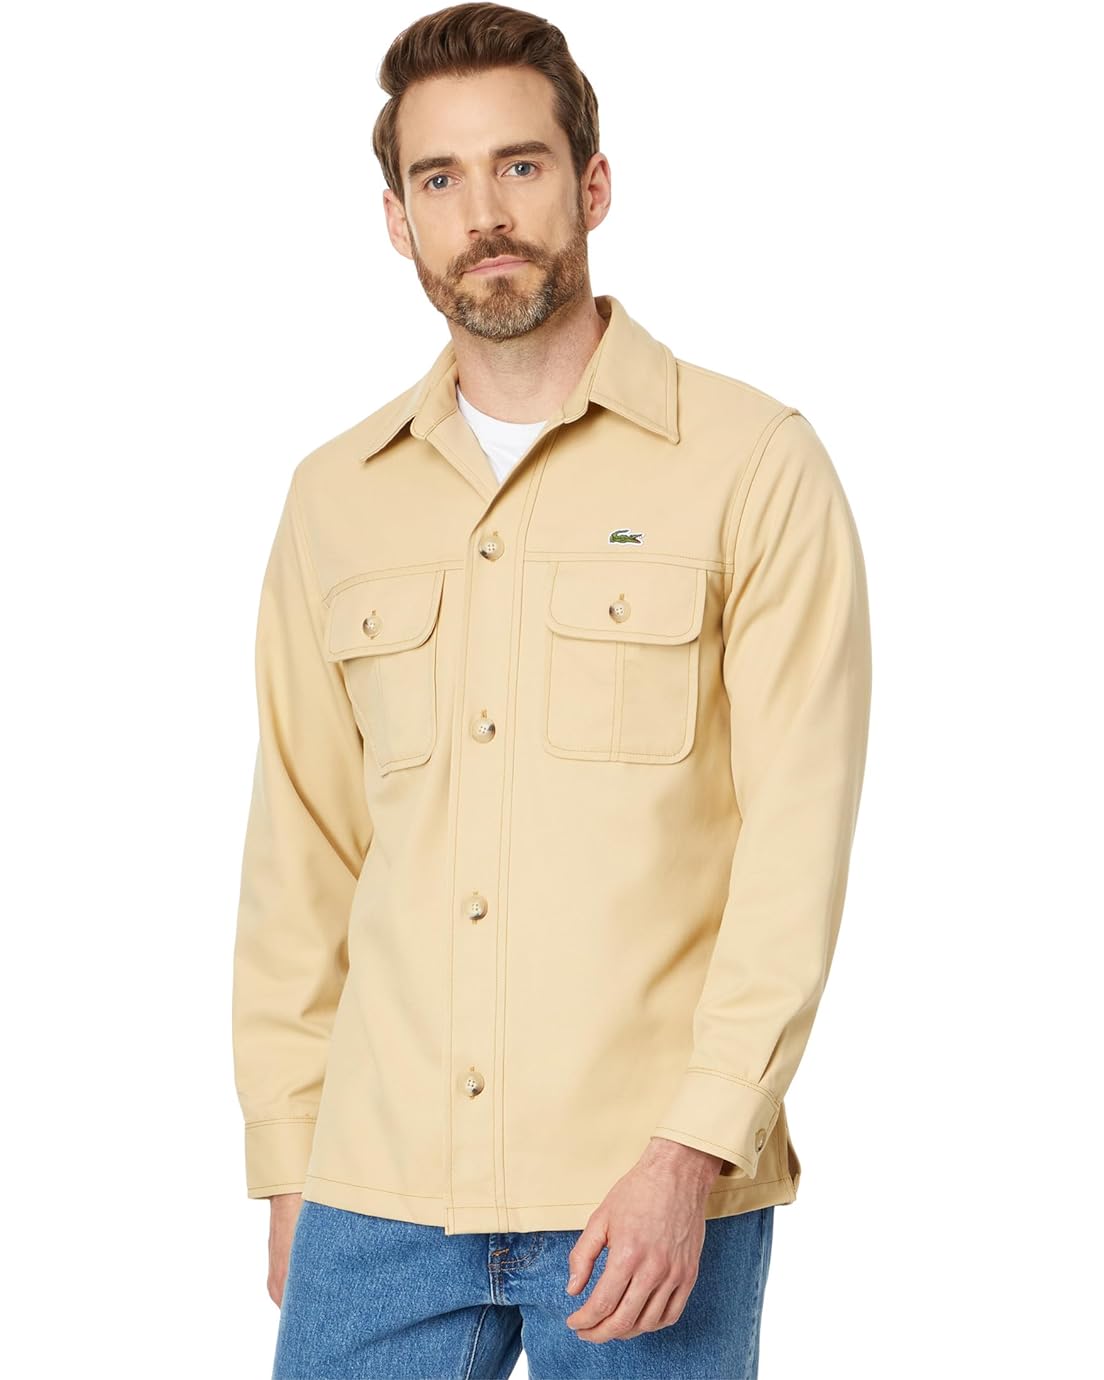 Lacoste Long Sleeve Overshirt Fit Button-Down Shirt w/ Two Front Pockets